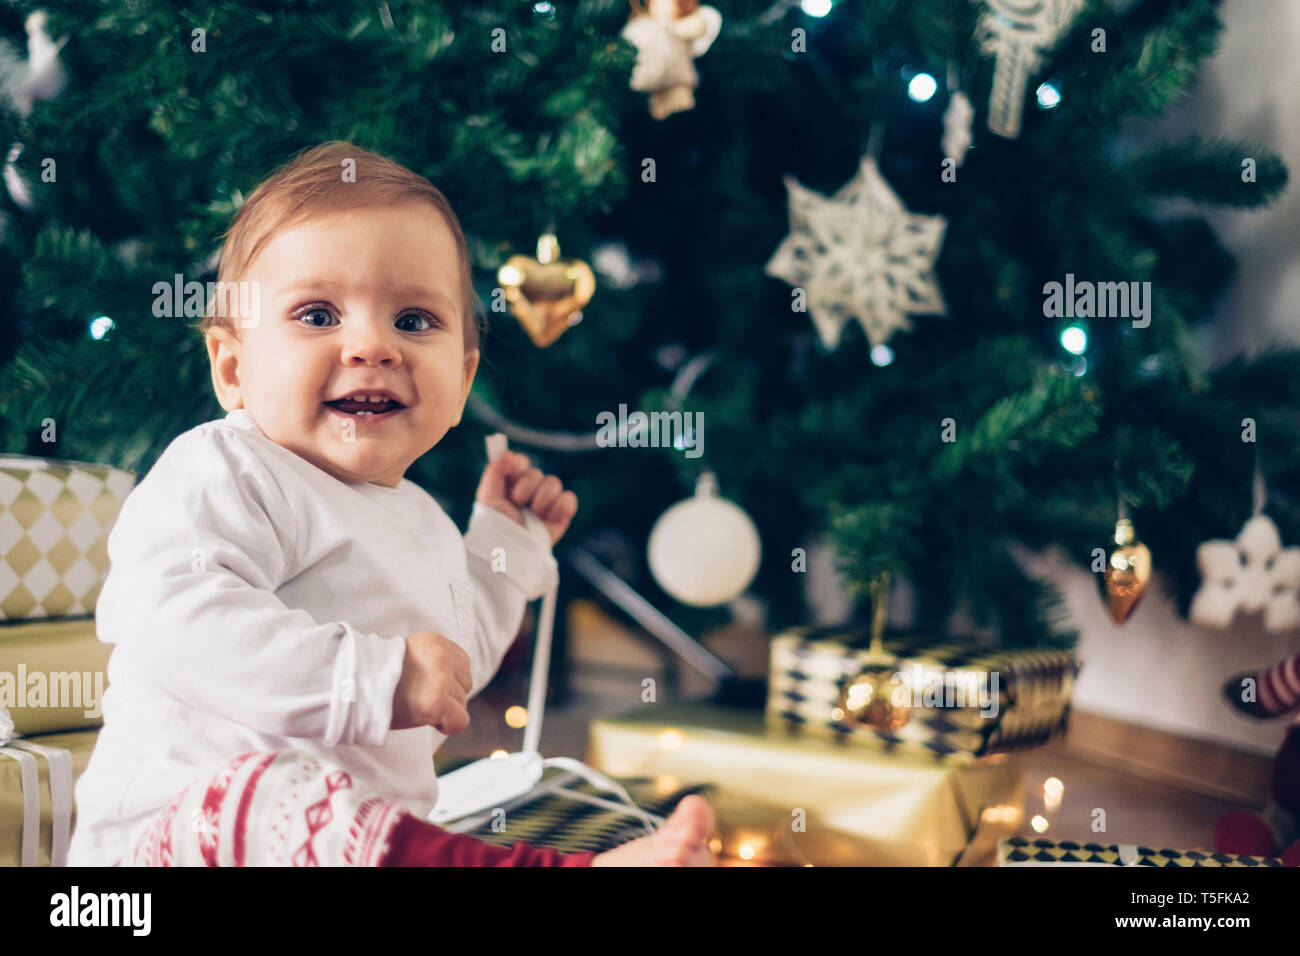 Portrait of smiling baby girl unpacking Christmas gifts Stock Photo